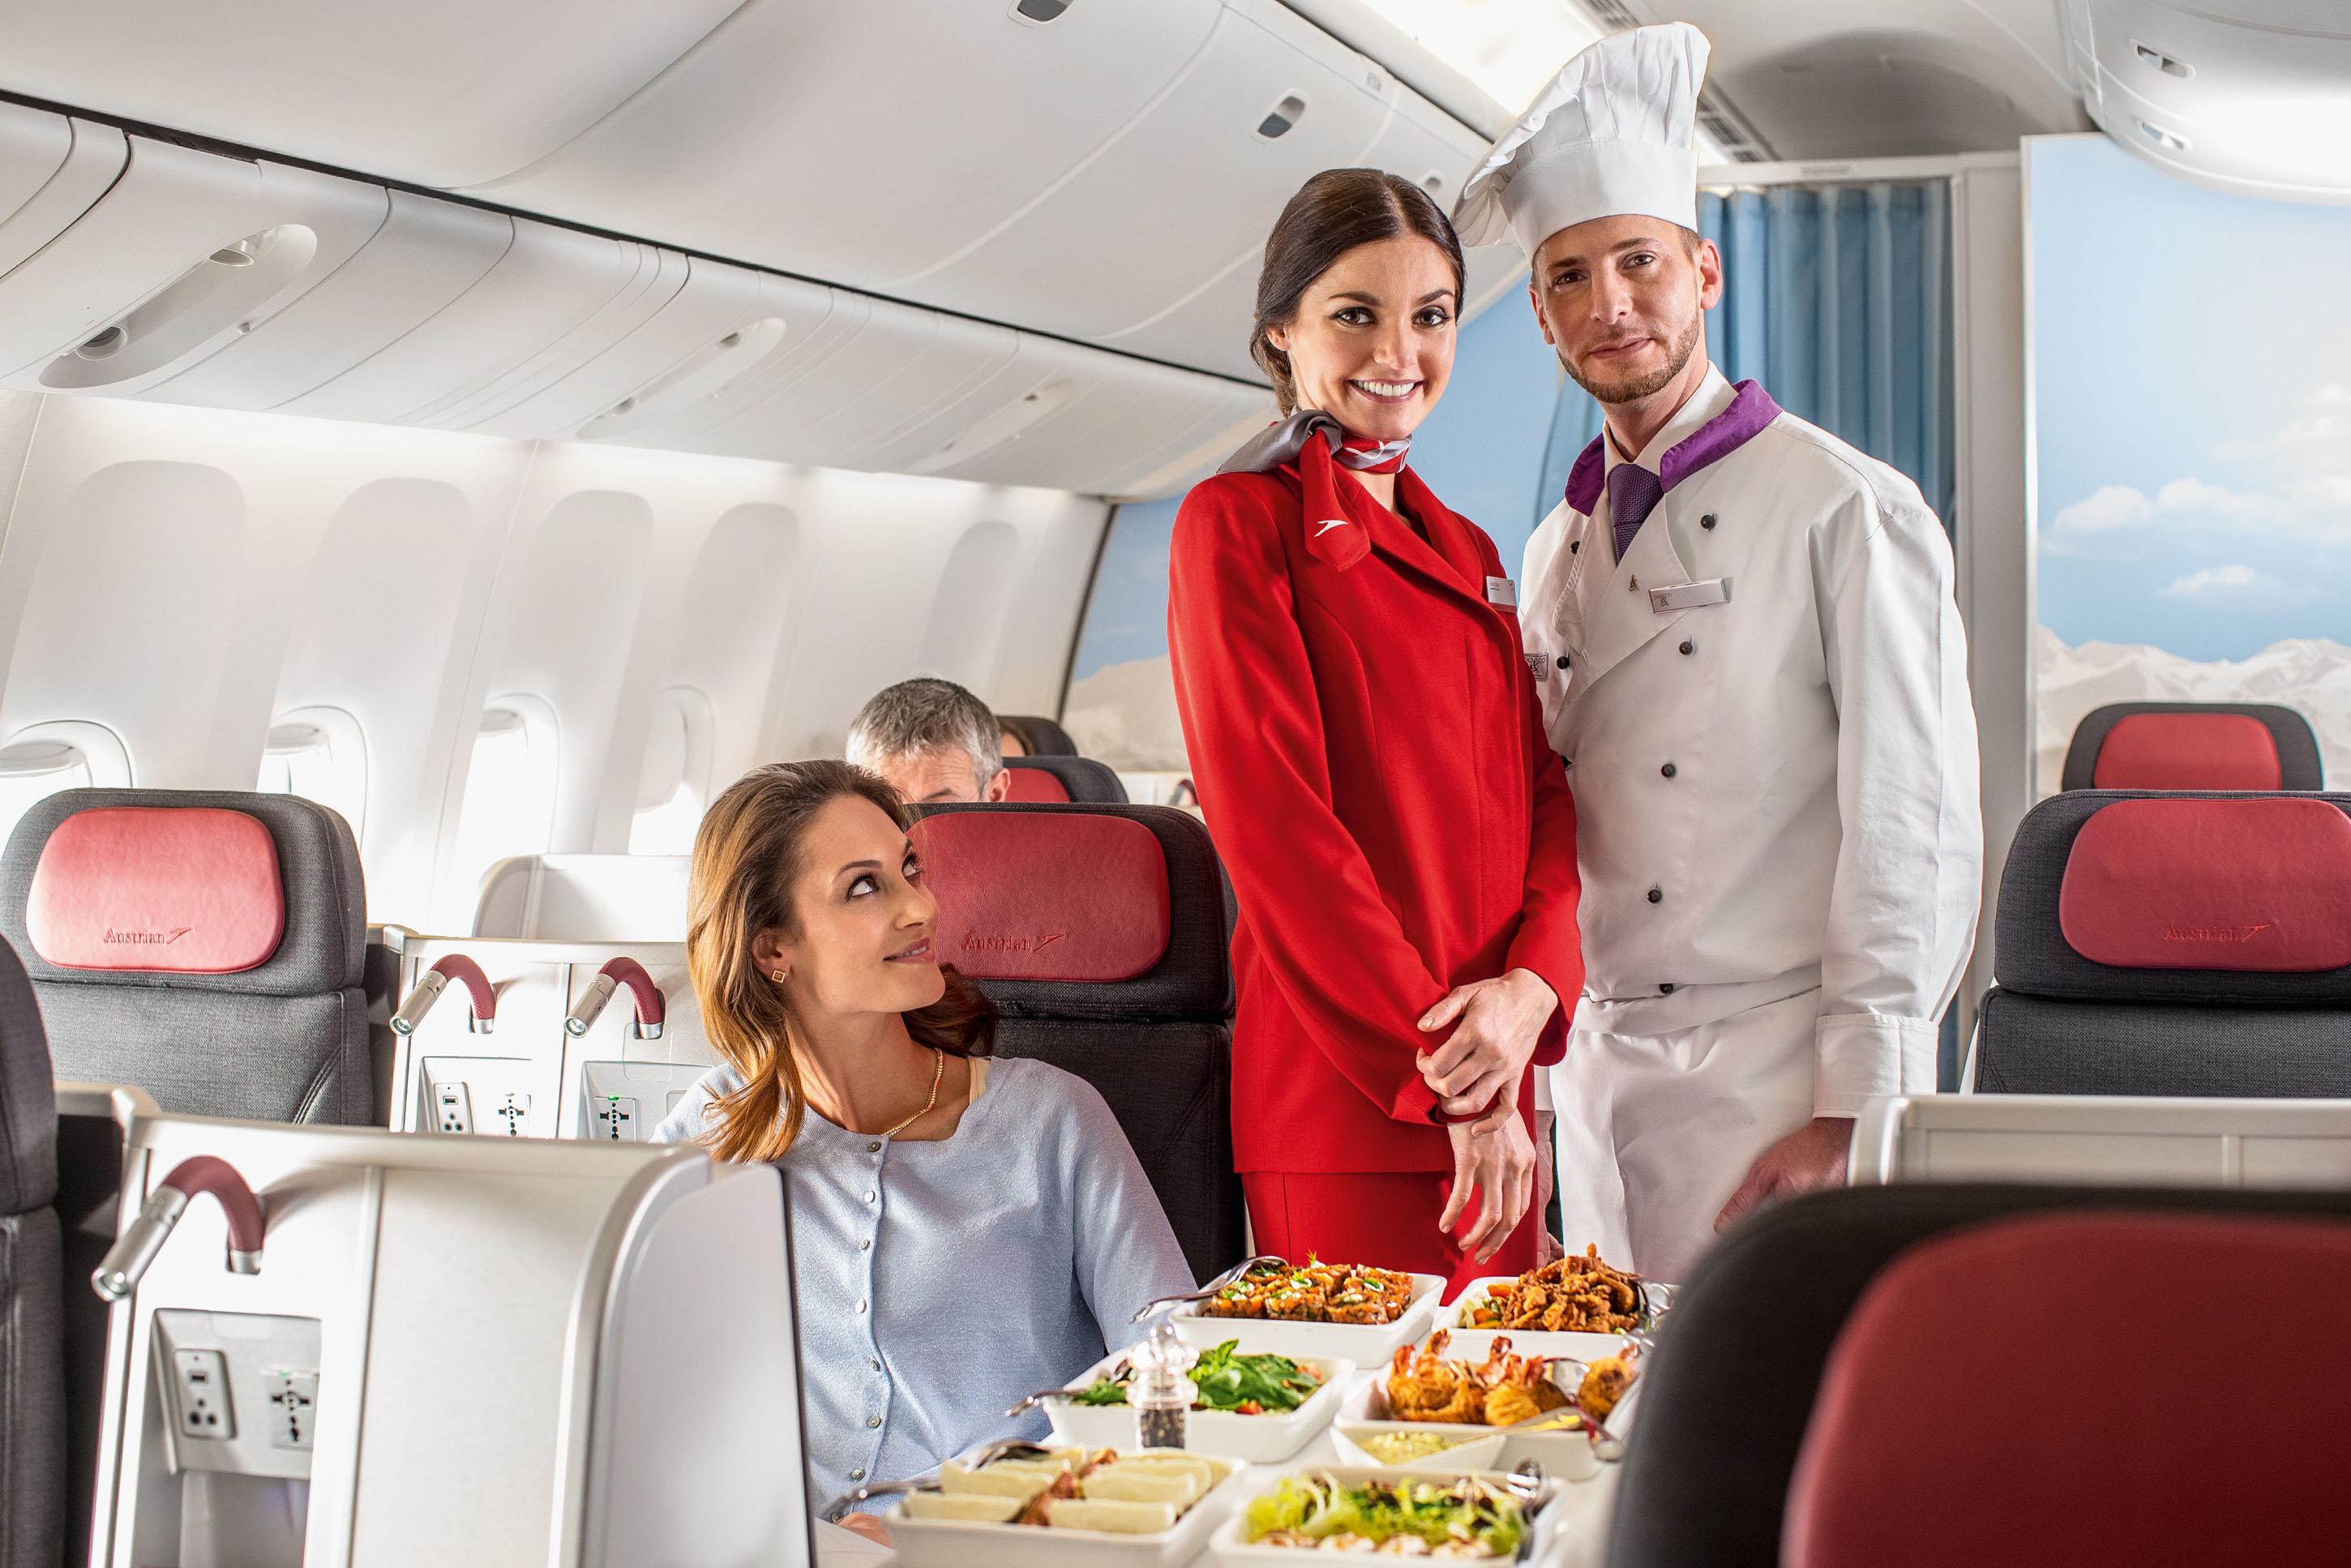 Delighting Your Guests: Enhancing the In-Flight Dining Experience